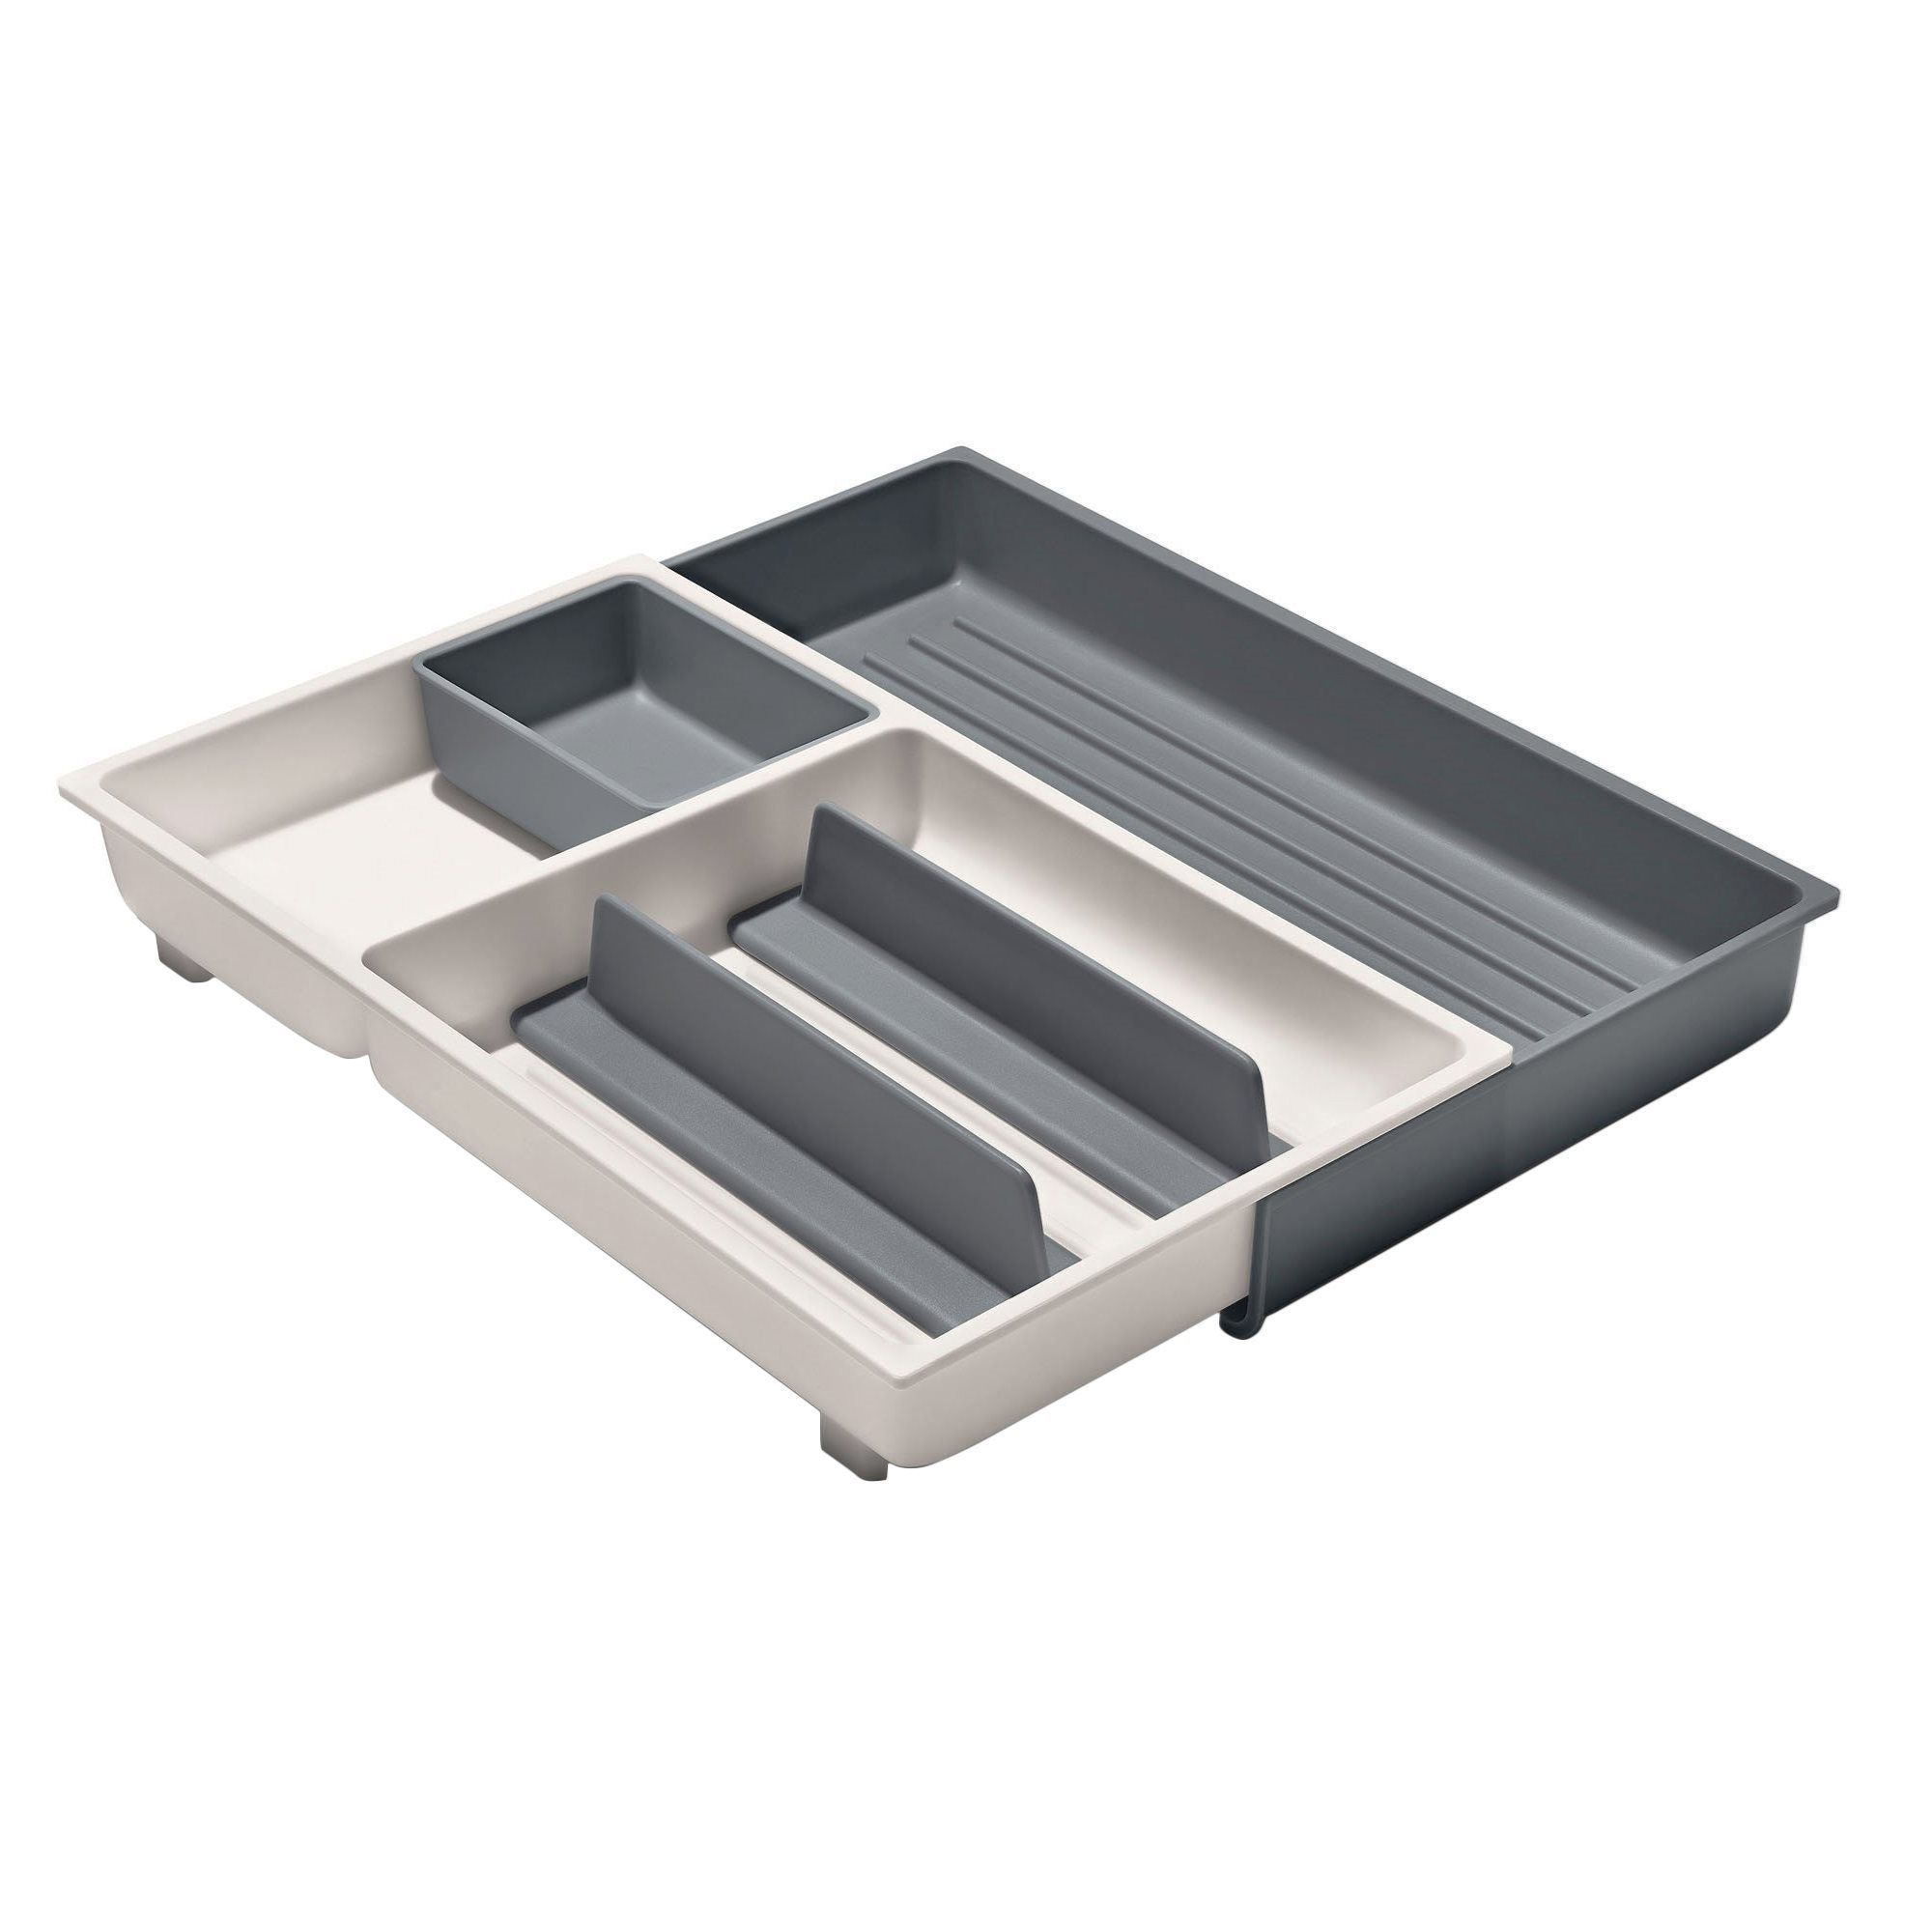 Stronghold sink caddy organizer, plastic - OXO